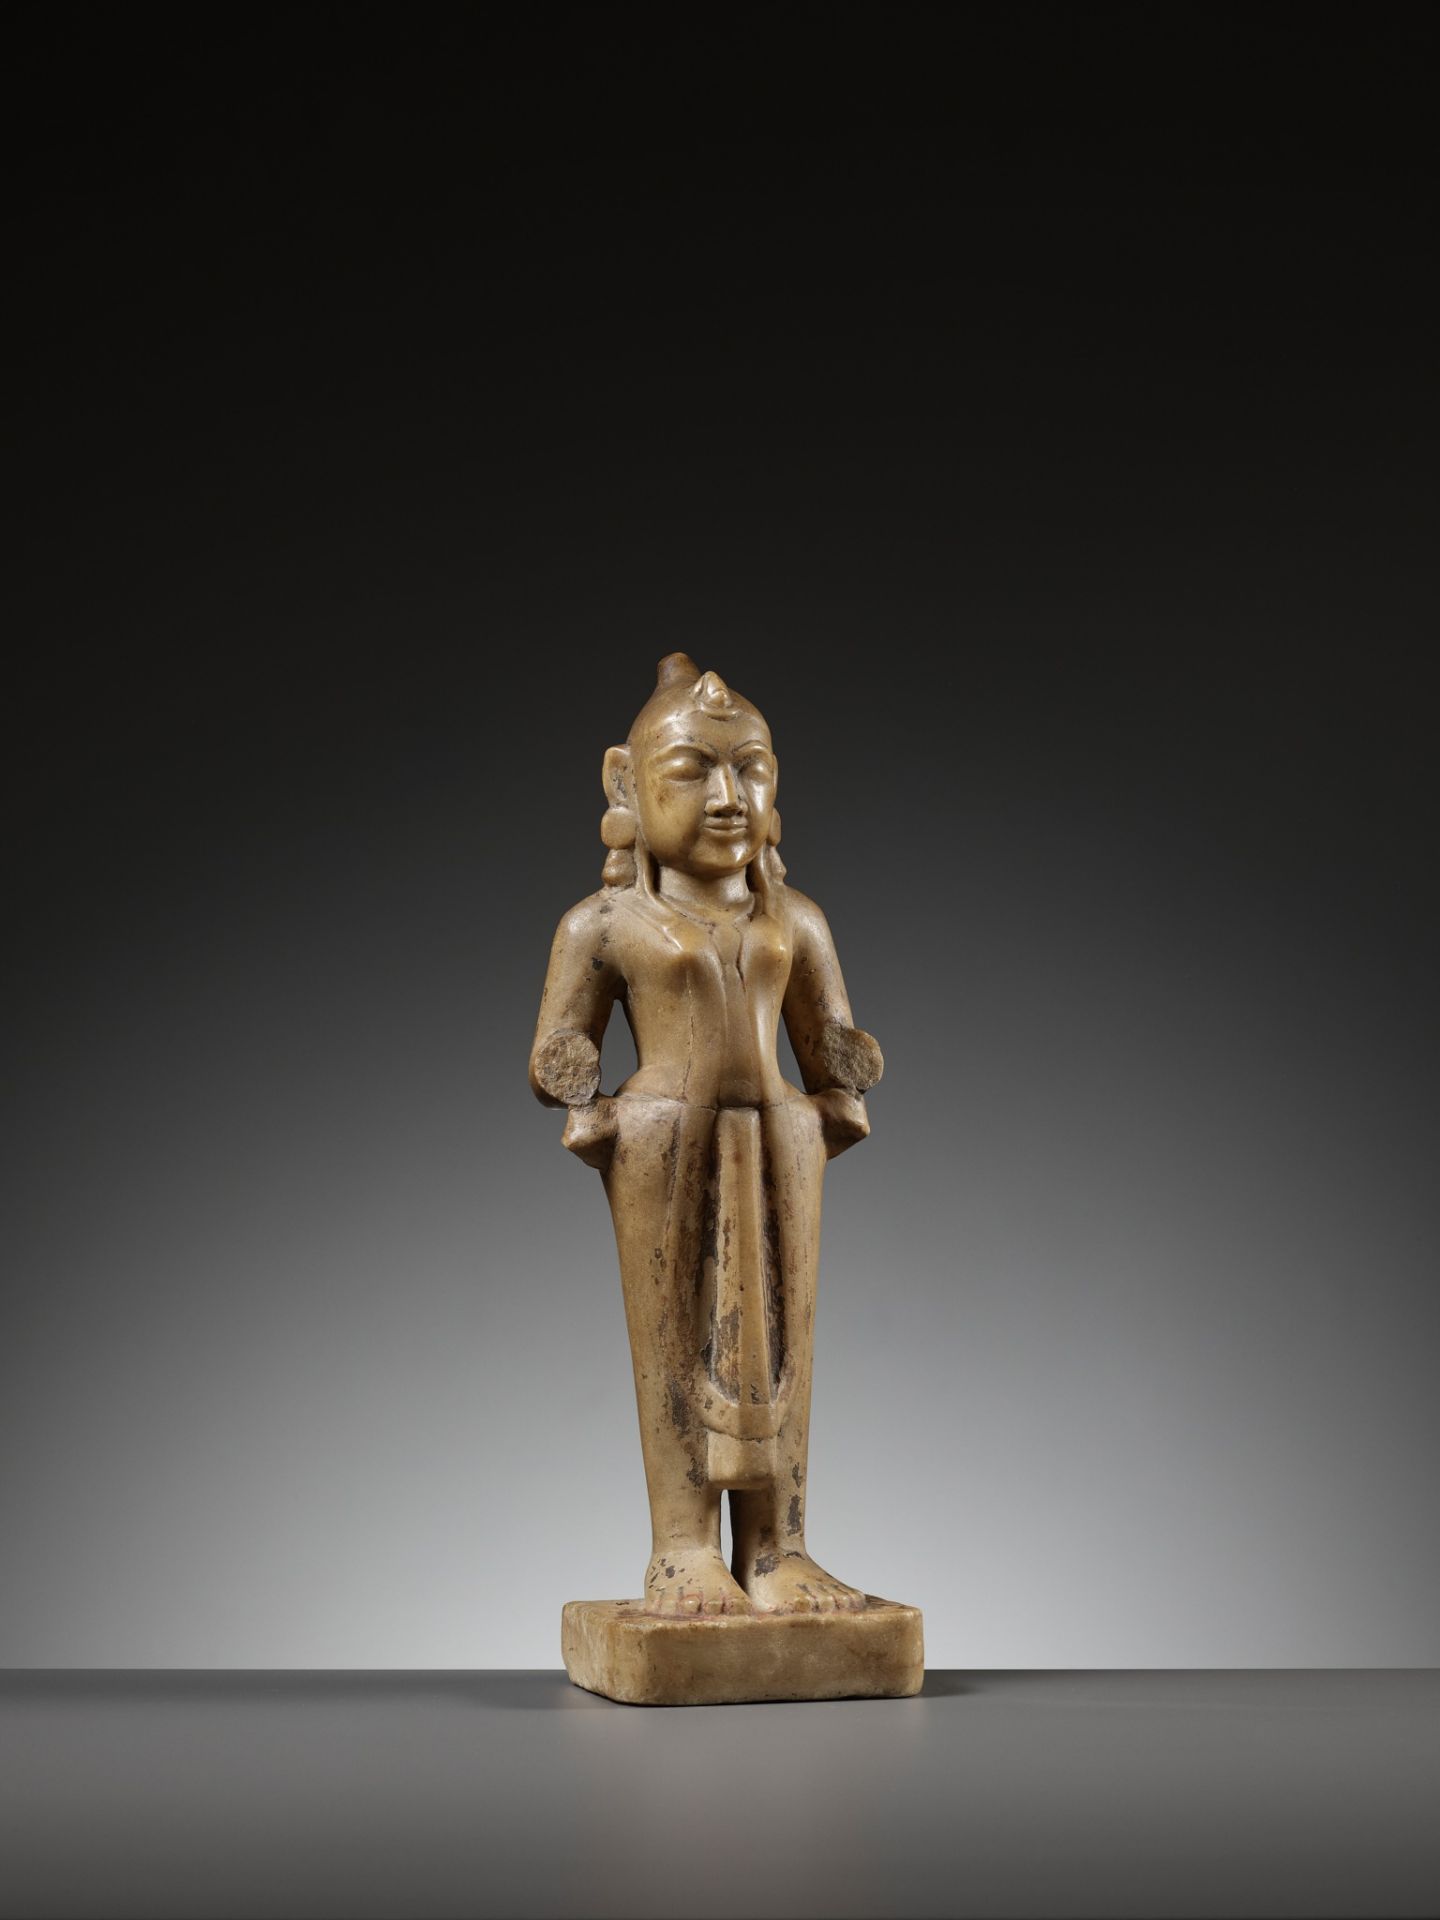 A MARBLE FIGURE OF RADHA, WESTERN INDIA, GUJARAT, 13TH-15TH CENTURY - Image 10 of 13